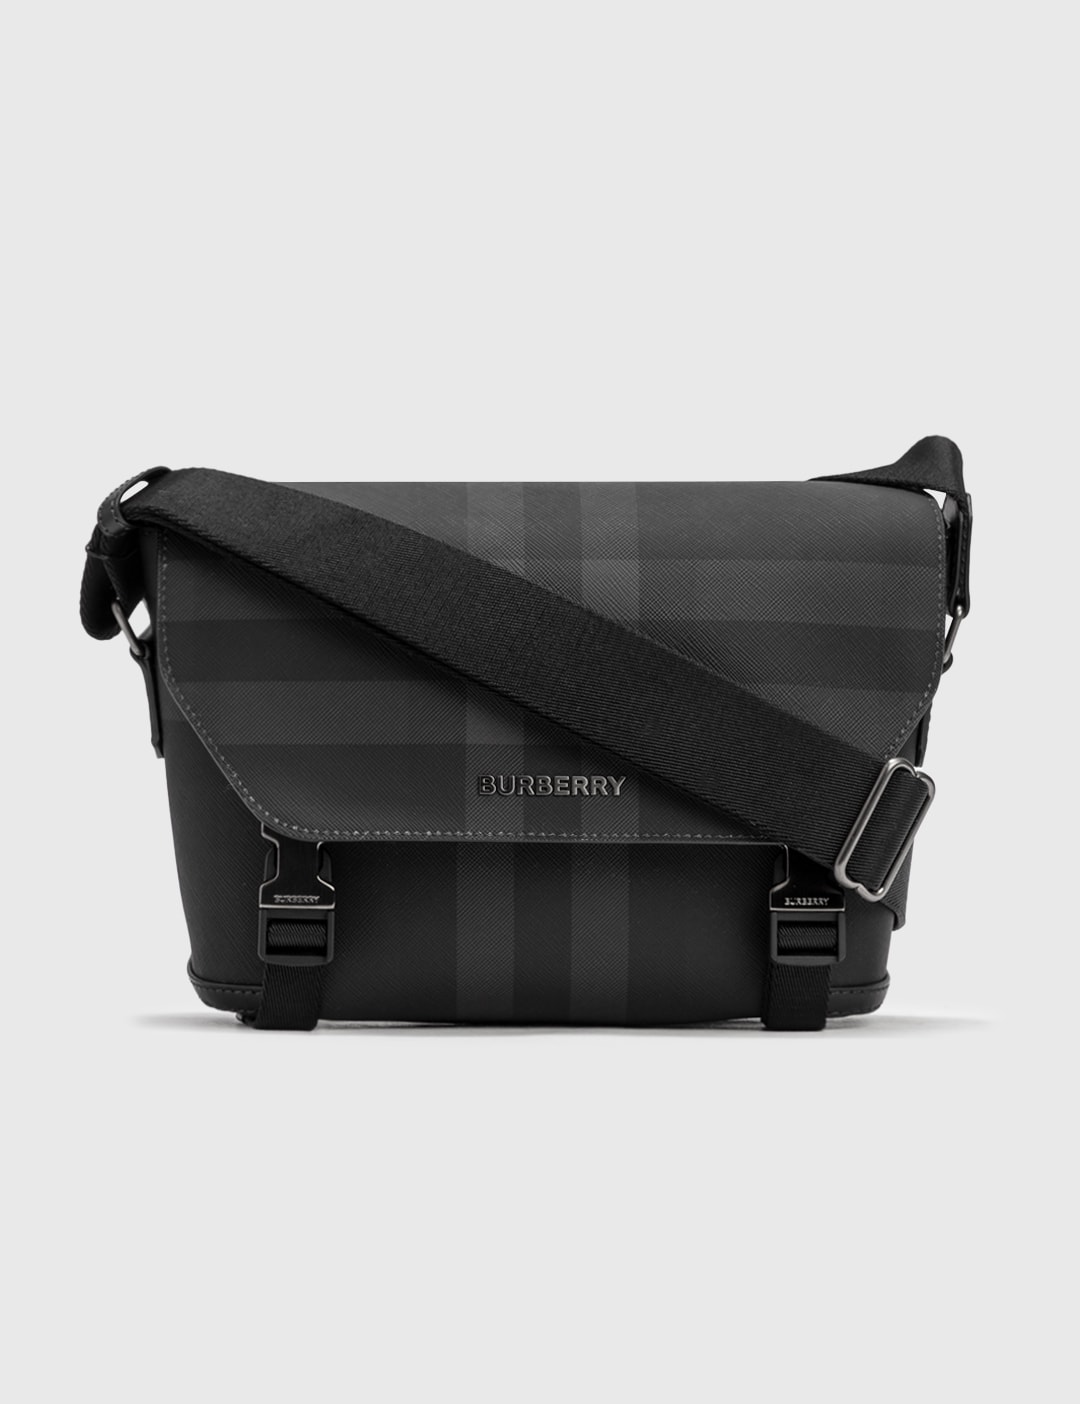 CHARCOAL CHECK AND LEATHER SMALL MESSENGER BAG Placeholder Image